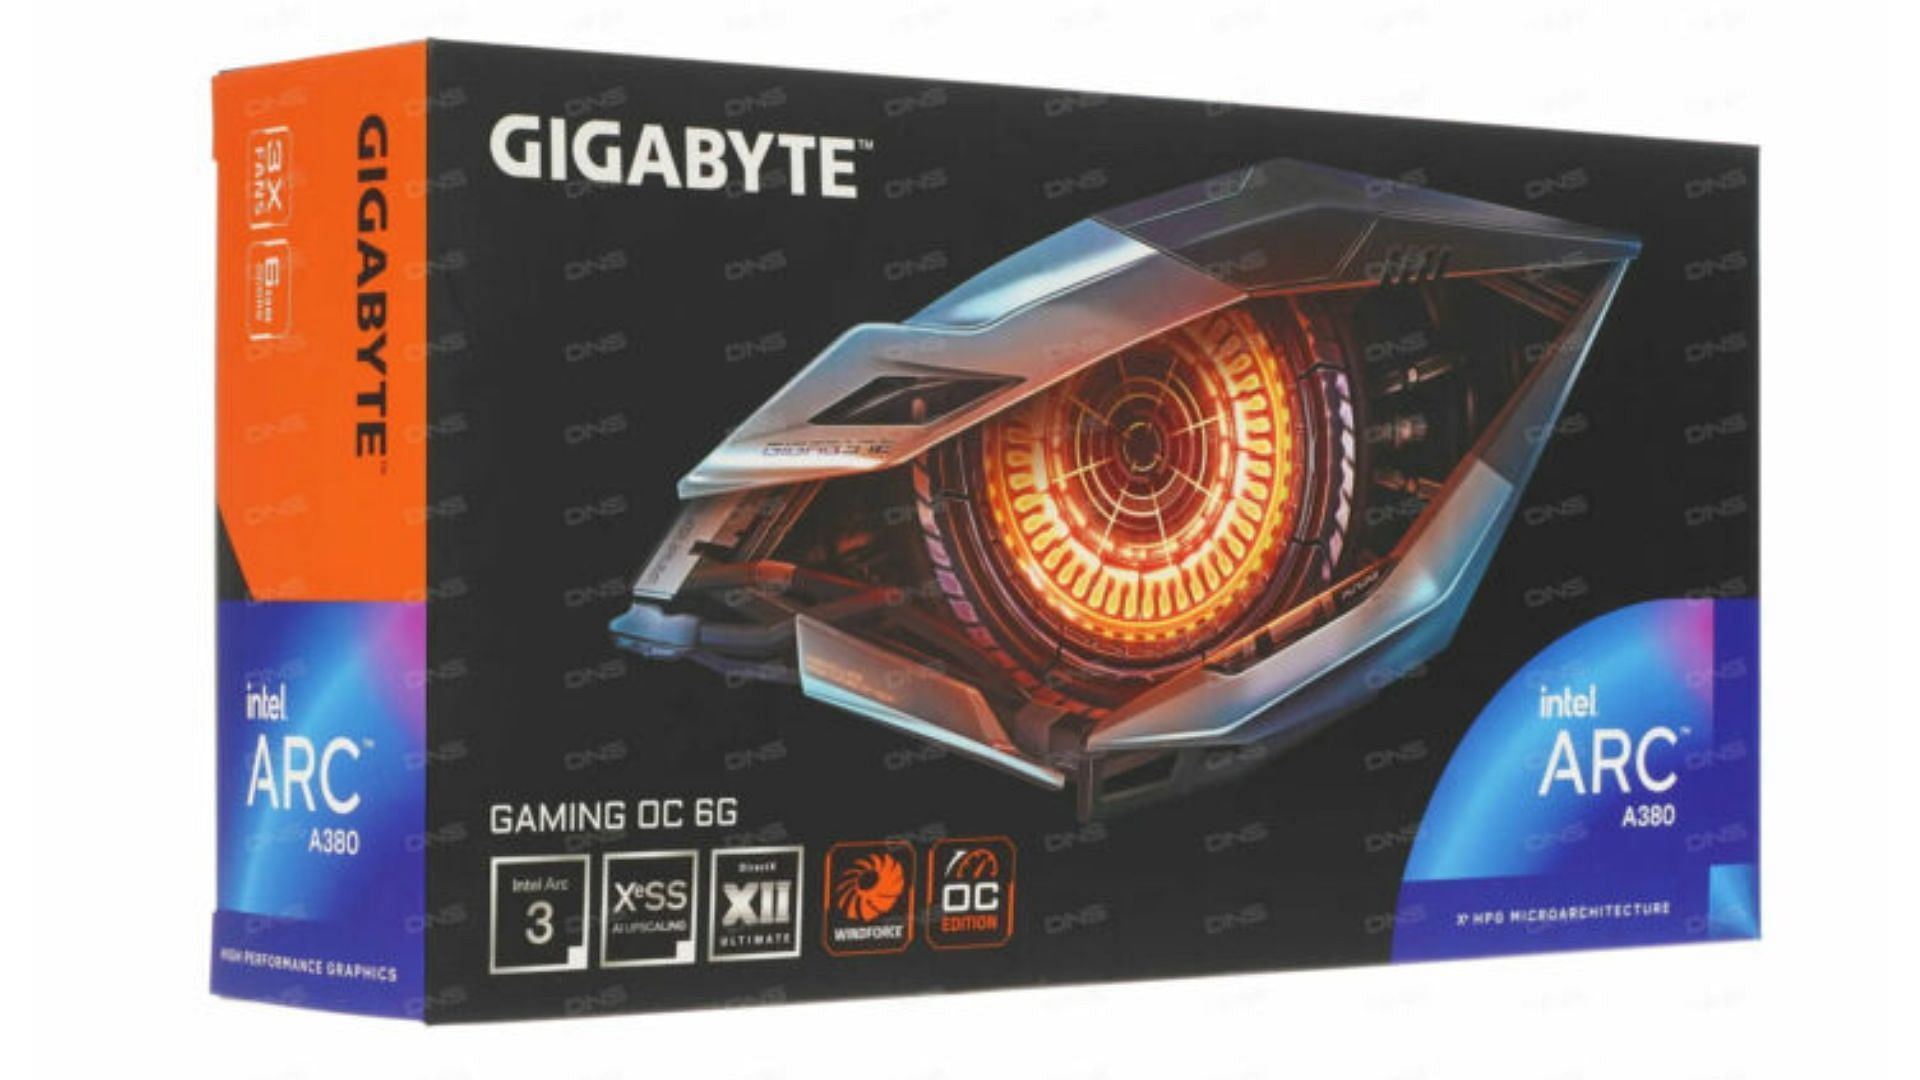 Packaging of the Gaming OC A380 card (Image via Gigabyte)